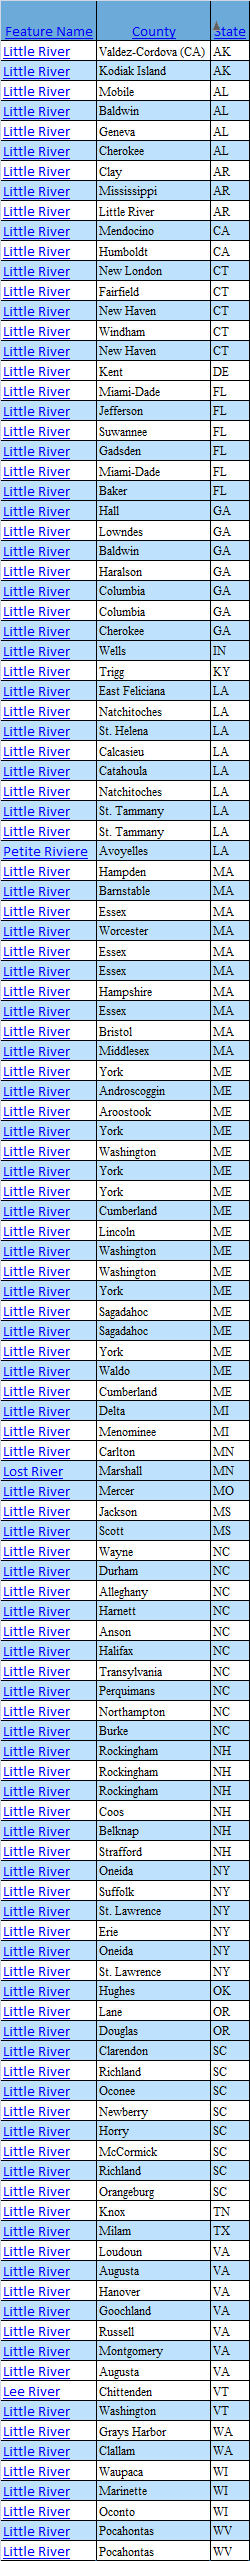 there are at least 128 streams named Little River in 30 states, including six in Virginia